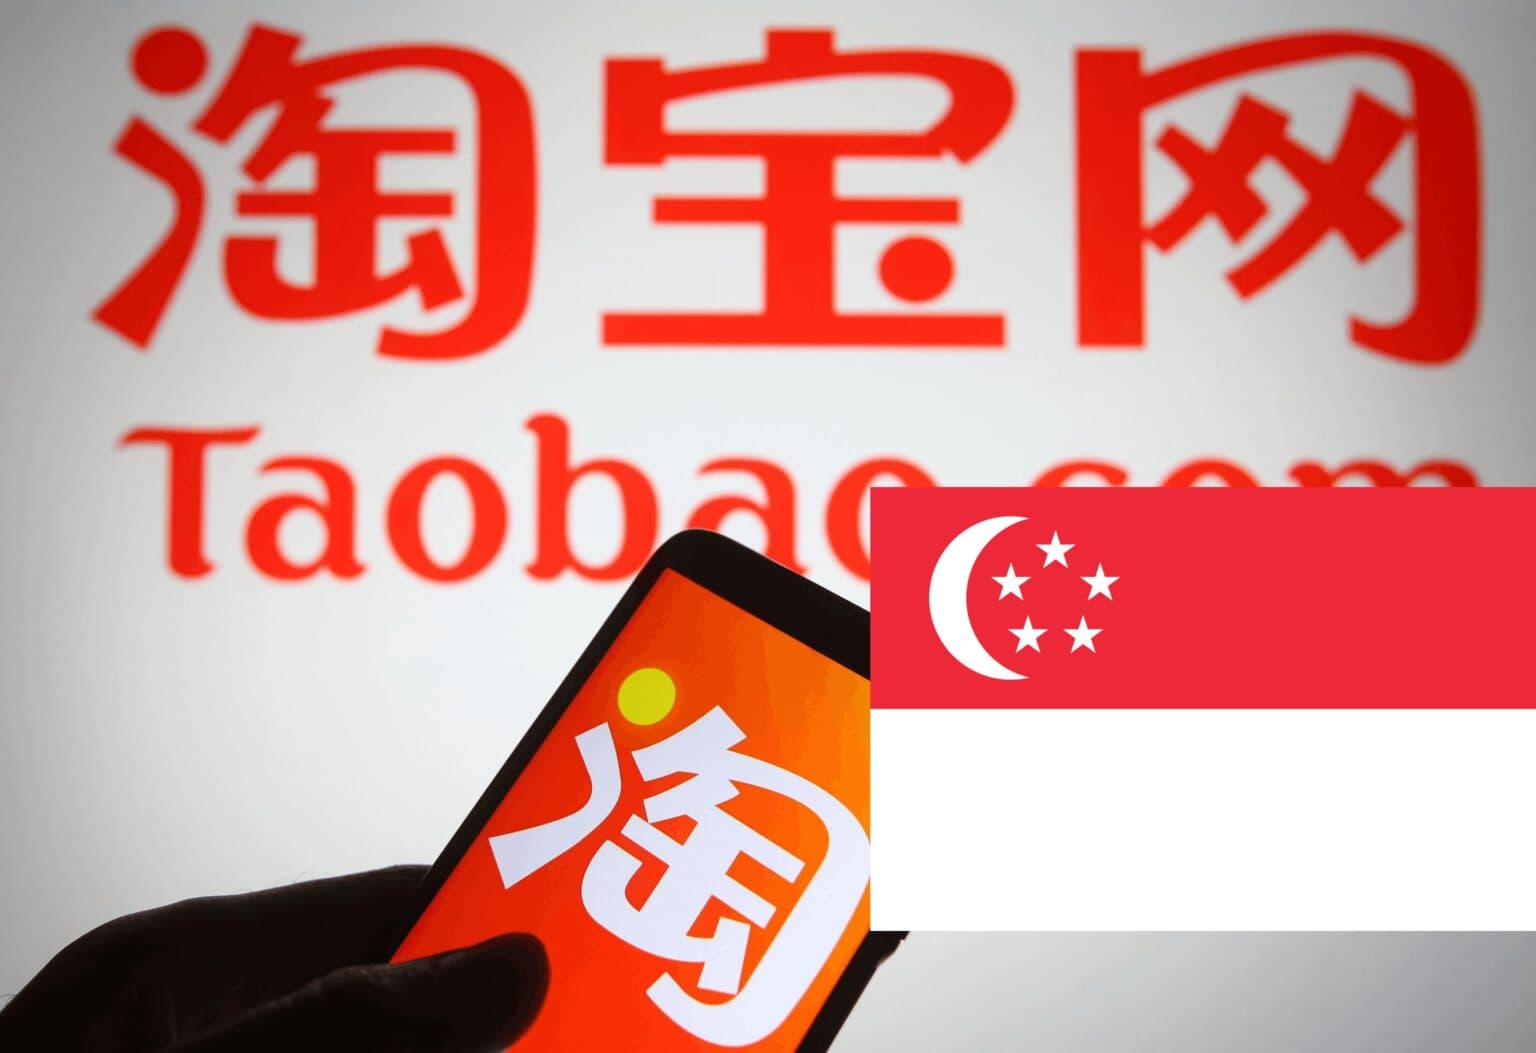 How To Order From Taobao to Singapore